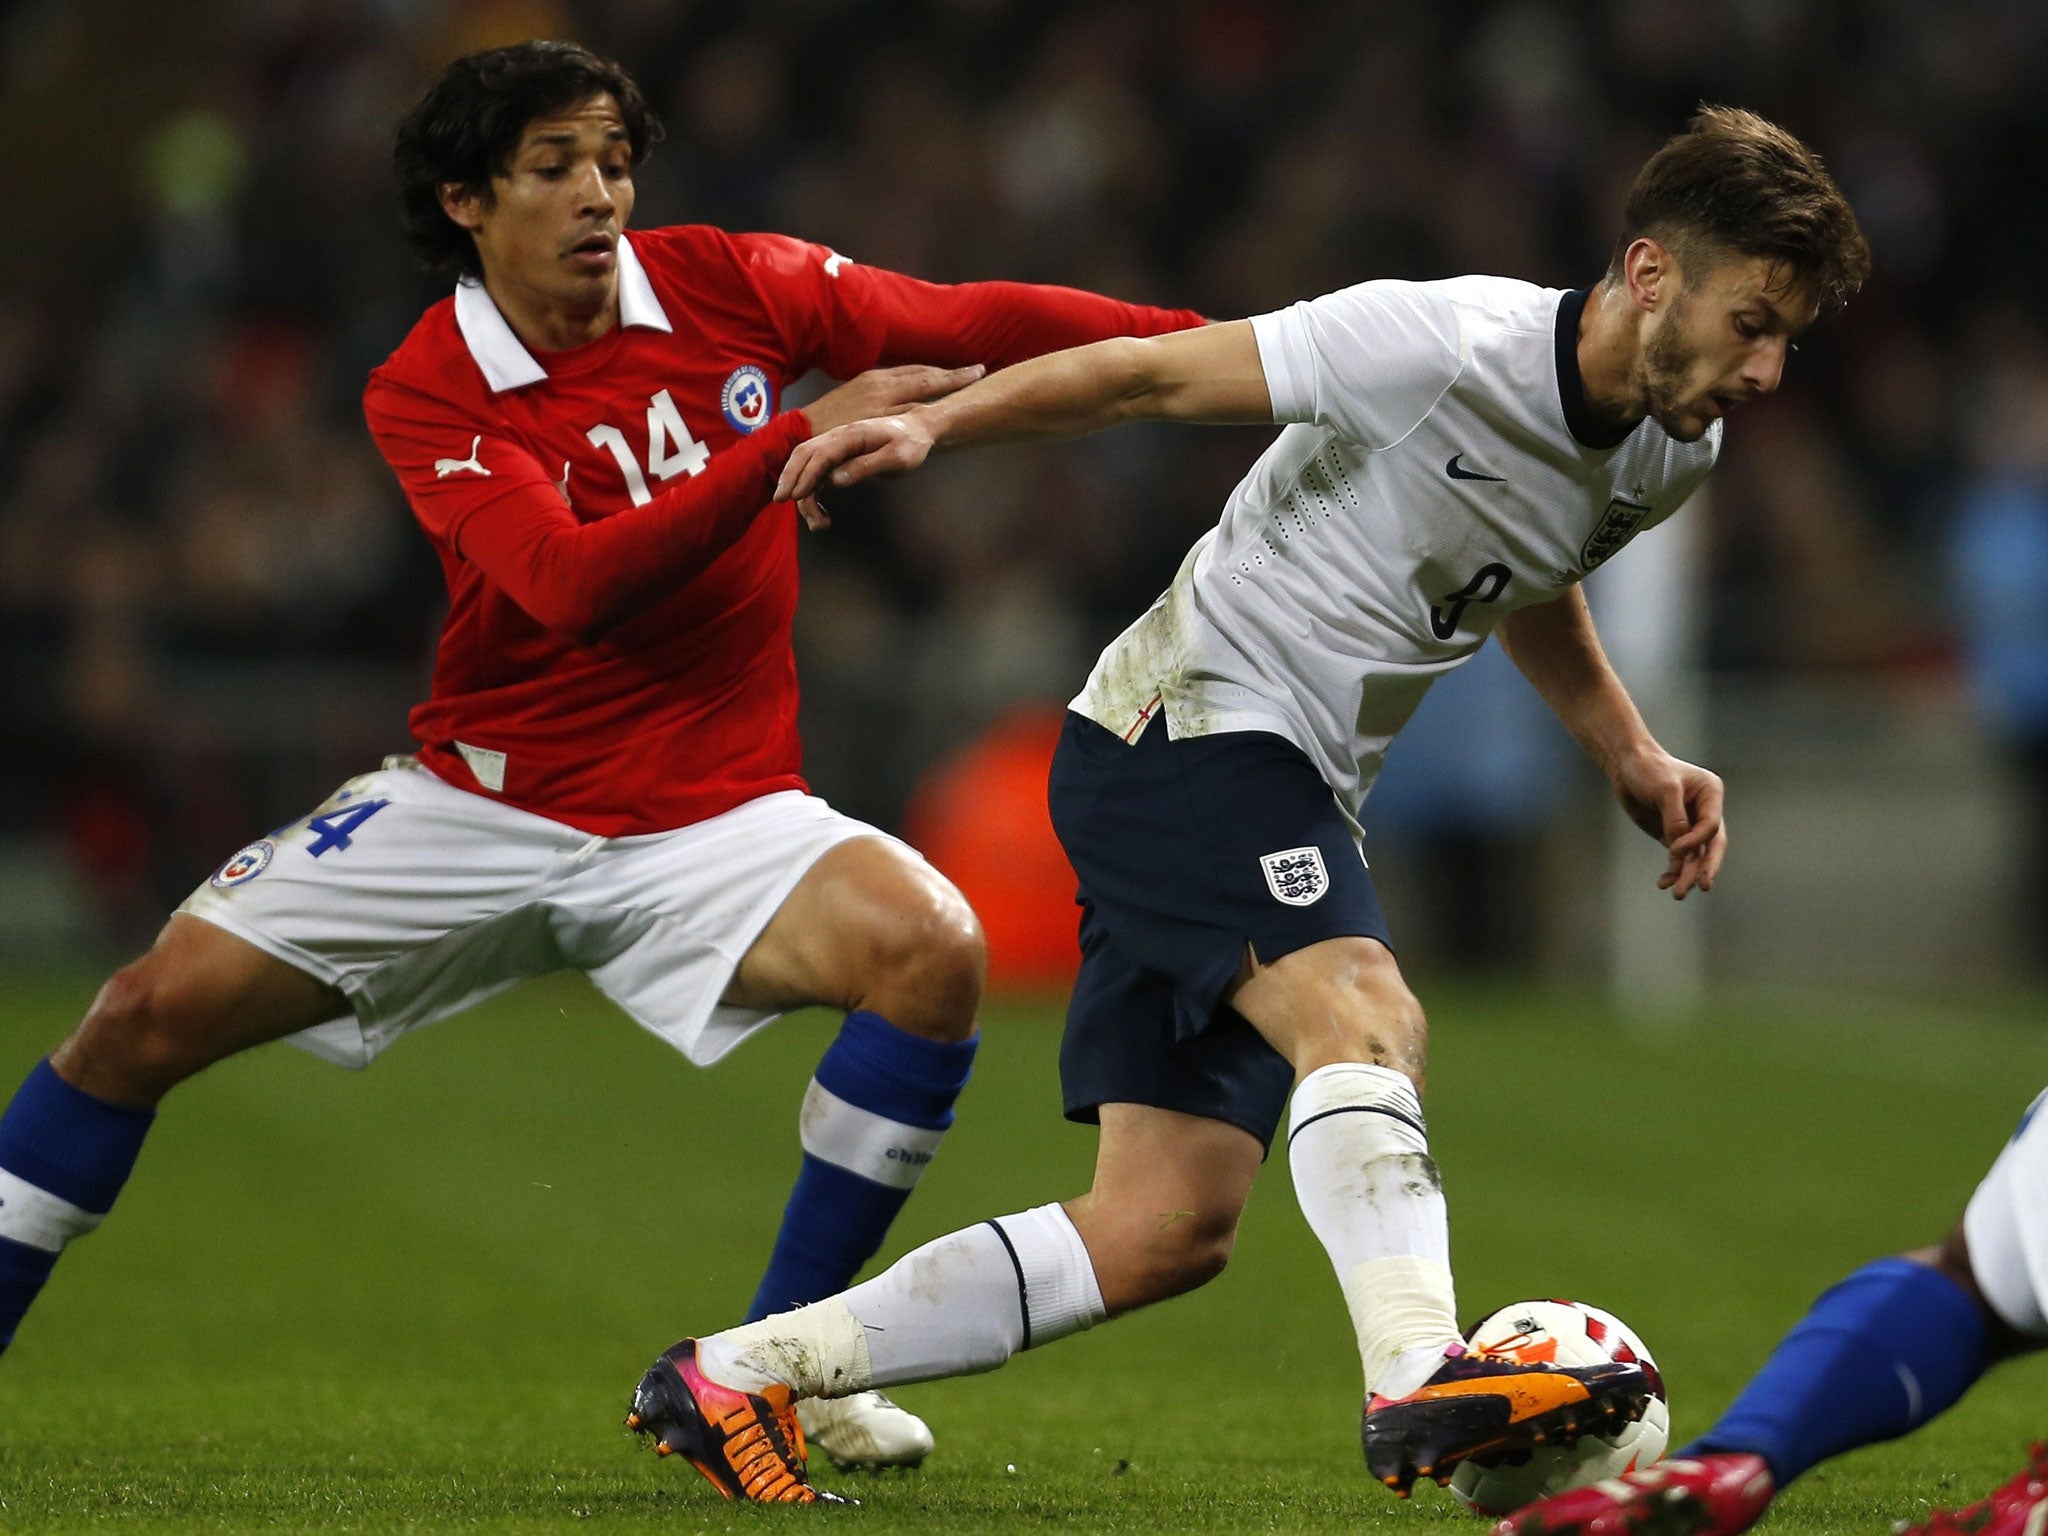 Adam Lallana was outshone on his debut by the visitors’ ability to dominate midfield